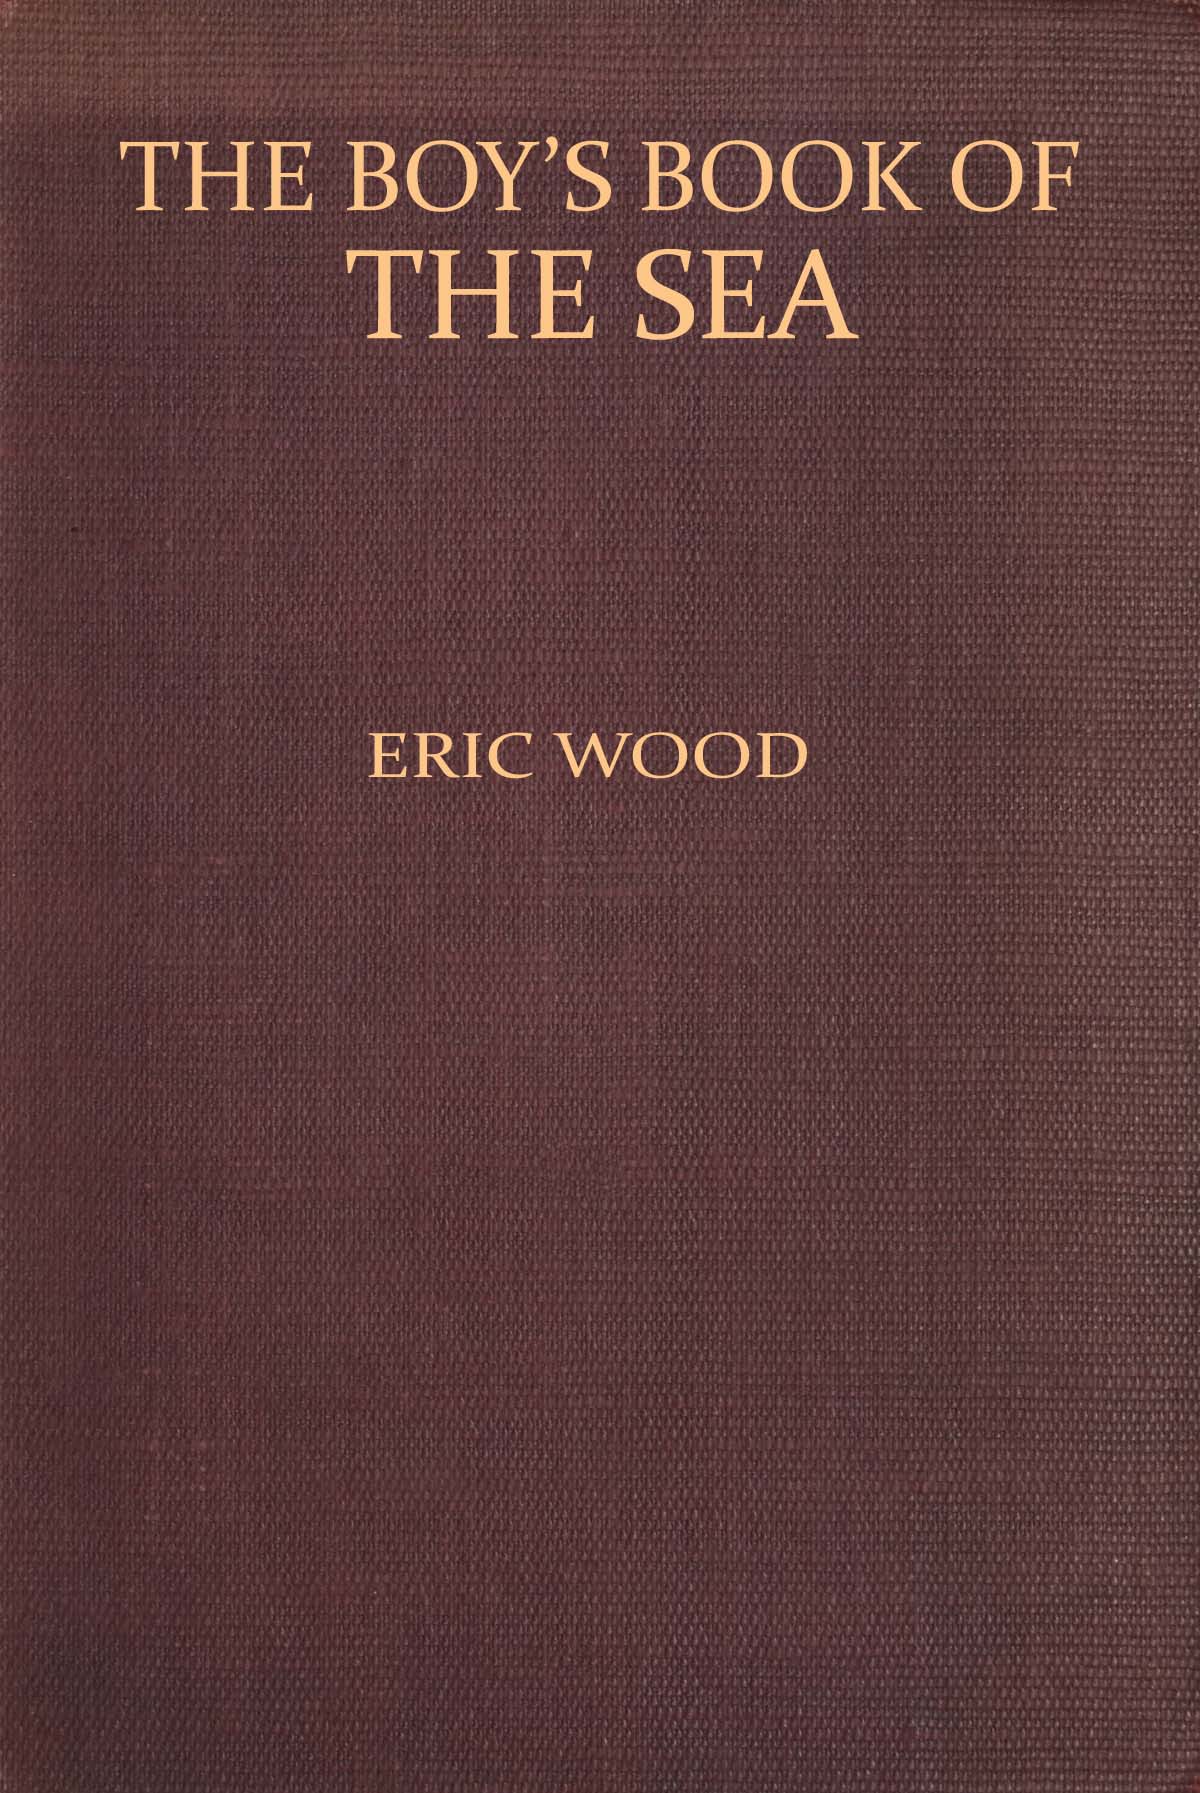 The Boy's Book of the Sea